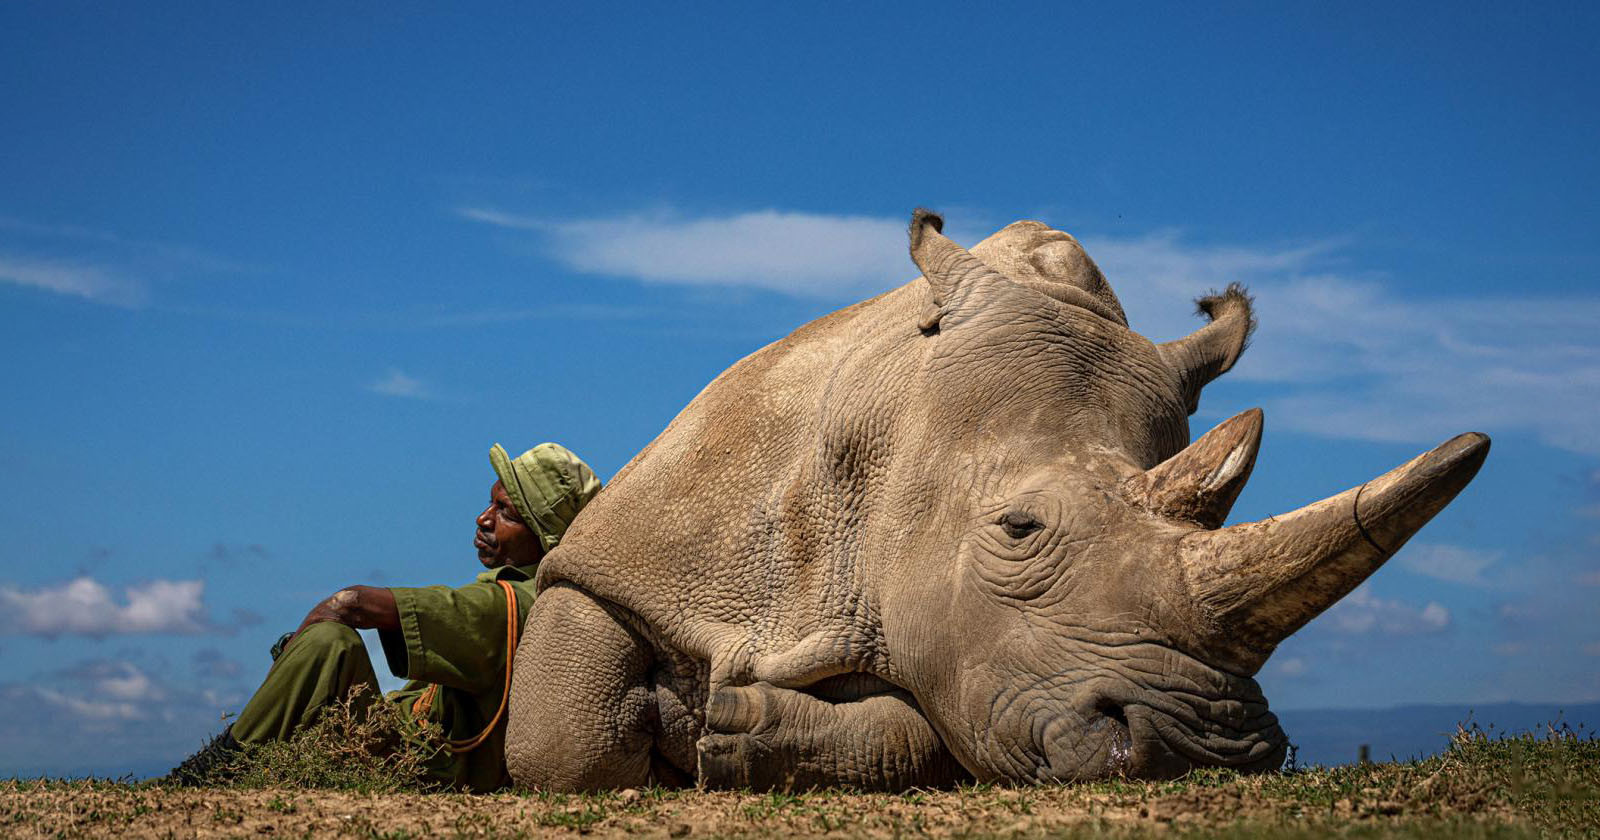 Photos of Last Northern White Rhino on Earth Wins Travel Photo Contest